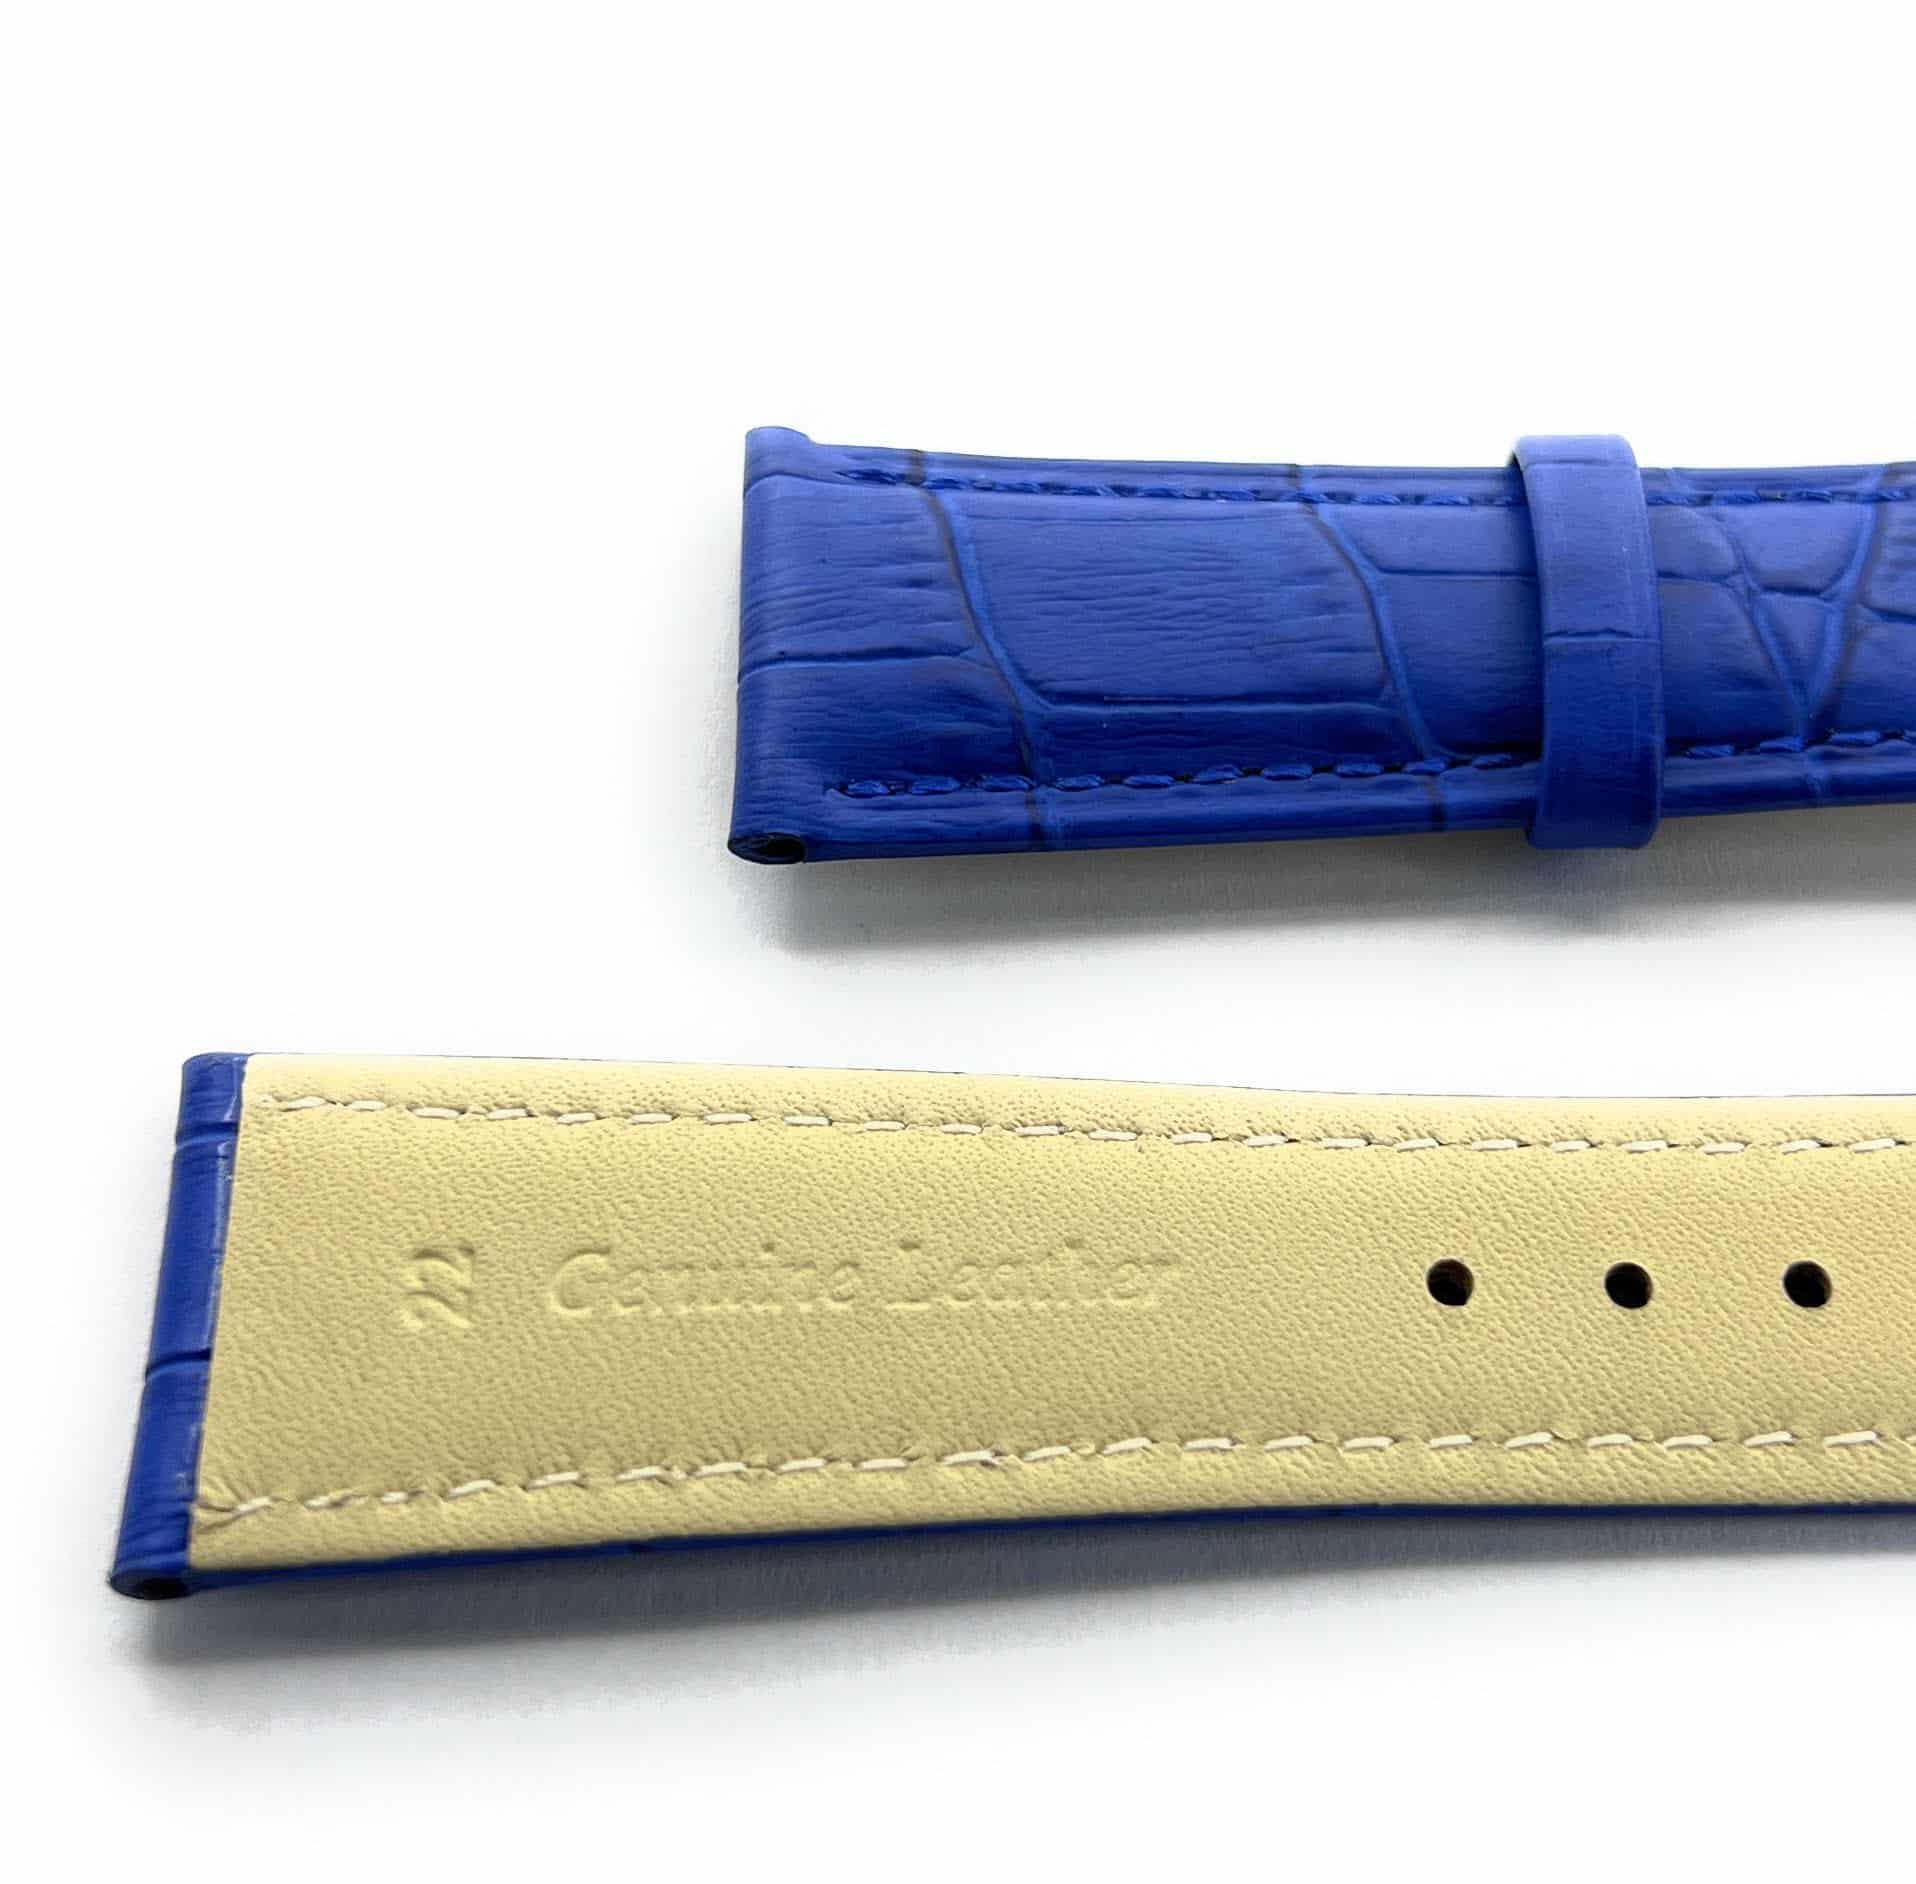 Immortal Blue • Leather Bracelet | INMIND Handcrafted Jewellery Leather Bracelet, Double Wrap Stainless Steel Clasp